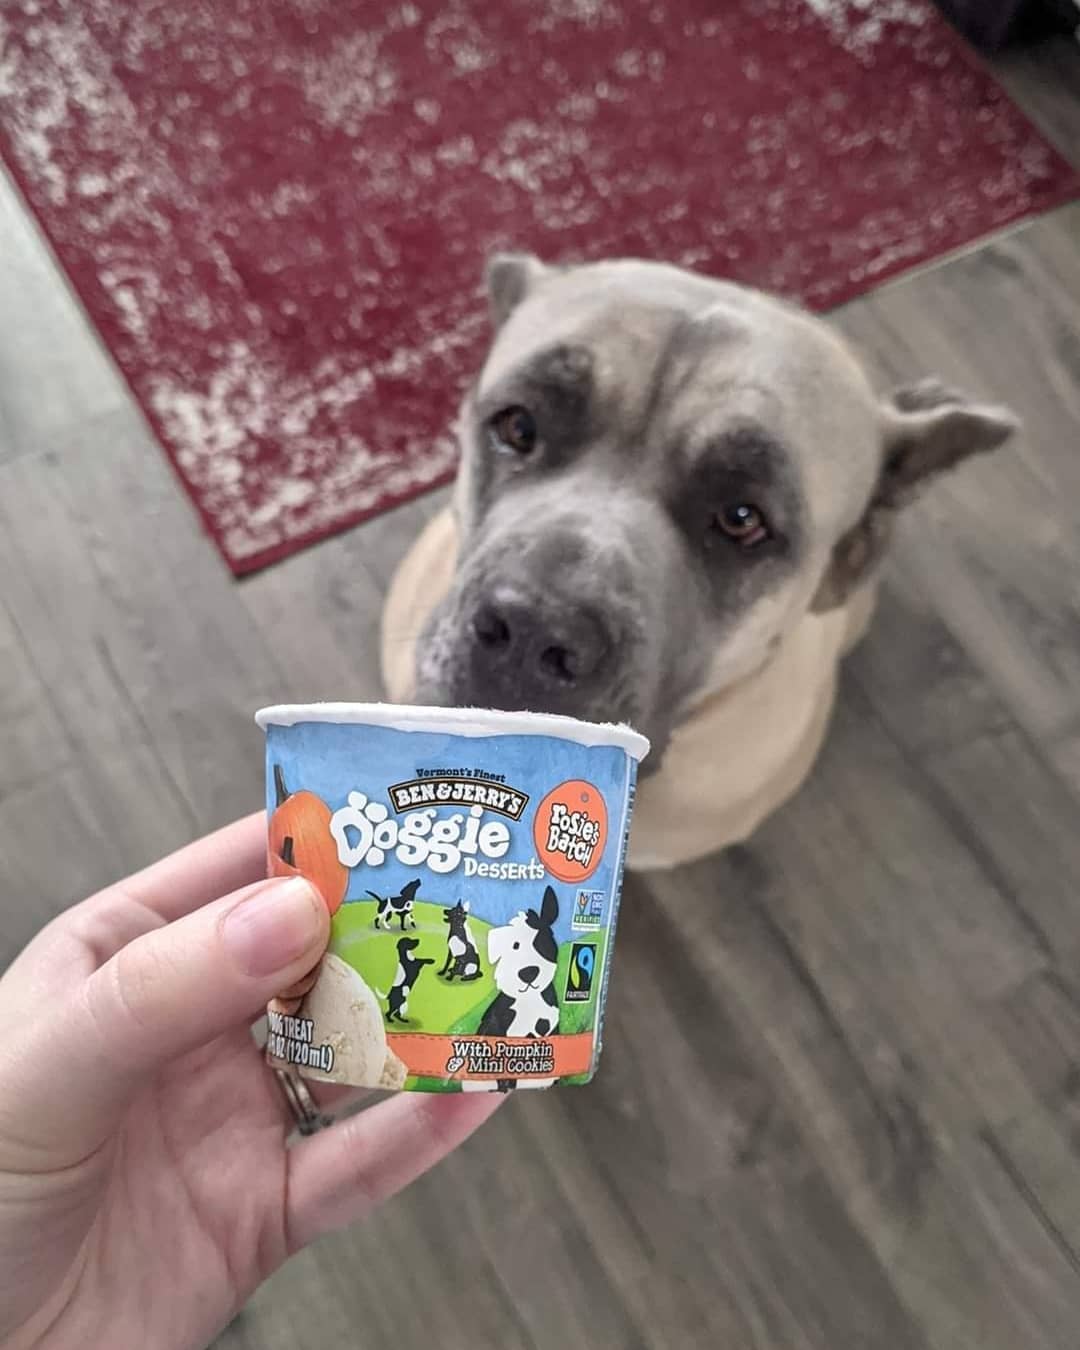 Buster alumni Willow really hit the jack pot 💵 with her furever home 🏡. Toys and puppy 🐶 ice cream are a regular occurrence.  We are so glad her furever home loves 💘 her so much!
<a target='_blank' href='https://www.instagram.com/explore/tags/thebusterfoundation/'>#thebusterfoundation</a>
<a target='_blank' href='https://www.instagram.com/explore/tags/busteralumni/'>#busteralumni</a>
<a target='_blank' href='https://www.instagram.com/explore/tags/pitbull/'>#pitbull</a>
<a target='_blank' href='https://www.instagram.com/explore/tags/pitbullsofinstagram/'>#pitbullsofinstagram</a>
<a target='_blank' href='https://www.instagram.com/explore/tags/pitbulladvocate/'>#pitbulladvocate</a>
<a target='_blank' href='https://www.instagram.com/explore/tags/bullybreed/'>#bullybreed</a>
<a target='_blank' href='https://www.instagram.com/explore/tags/dontbullymybreed/'>#dontbullymybreed</a>
<a target='_blank' href='https://www.instagram.com/explore/tags/canecorsogram/'>#canecorsogram</a>
<a target='_blank' href='https://www.instagram.com/explore/tags/canecorsosofinstagram/'>#canecorsosofinstagram</a>
<a target='_blank' href='https://www.instagram.com/explore/tags/adoptthecropped/'>#adoptthecropped</a>